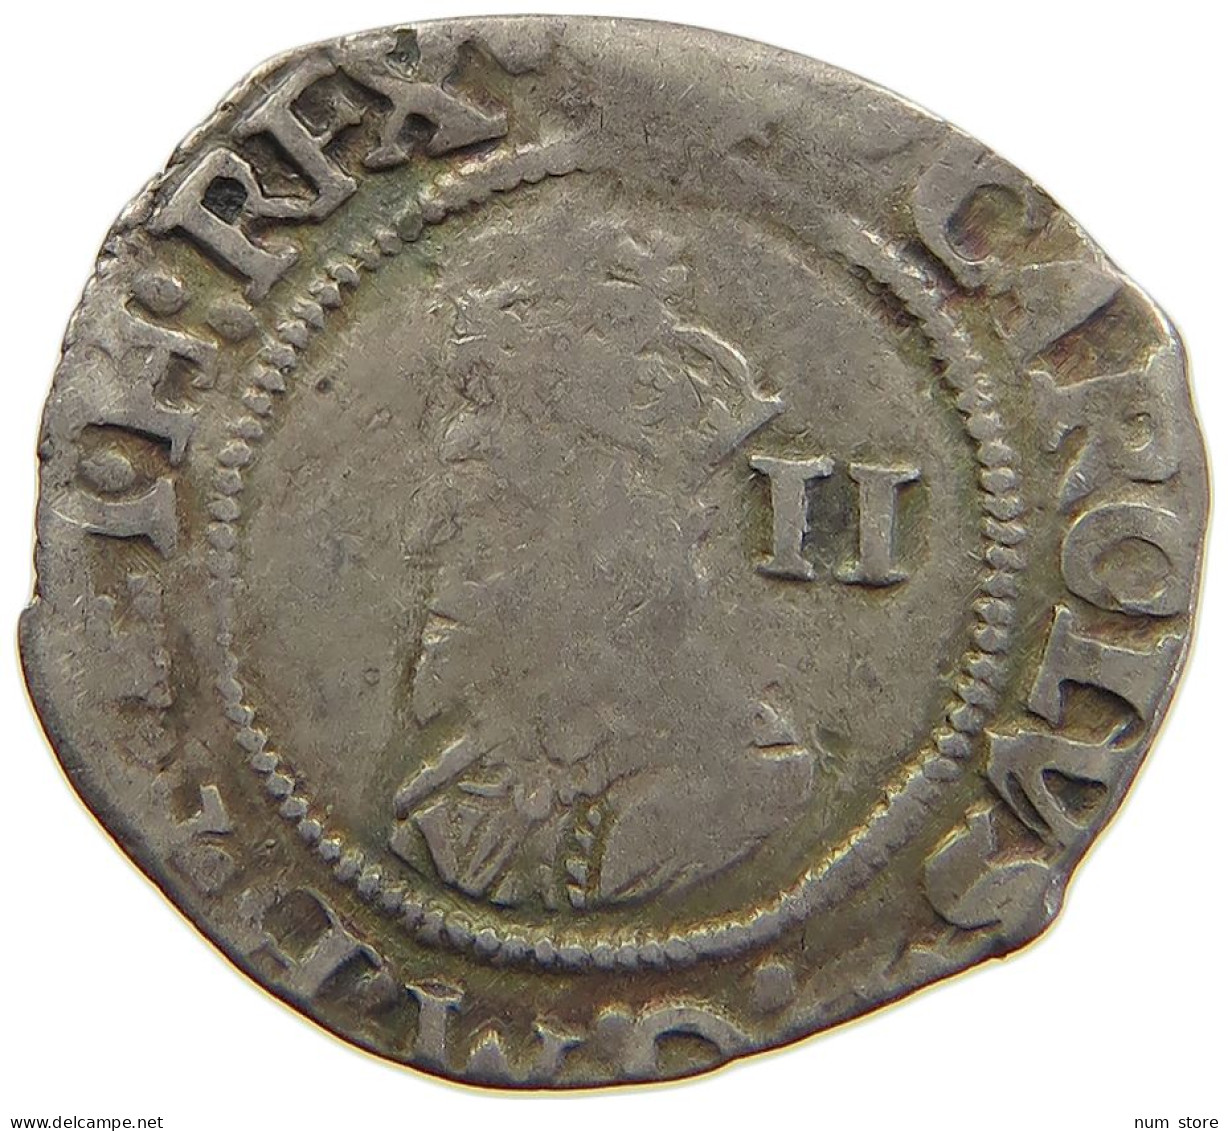 GREAT BRITAIN 2 PENCE TWOPENCE HALFGROAT  CHARLES I. (1625-1649) #t158 0479 - E. 1 1/2 - 2 Pence